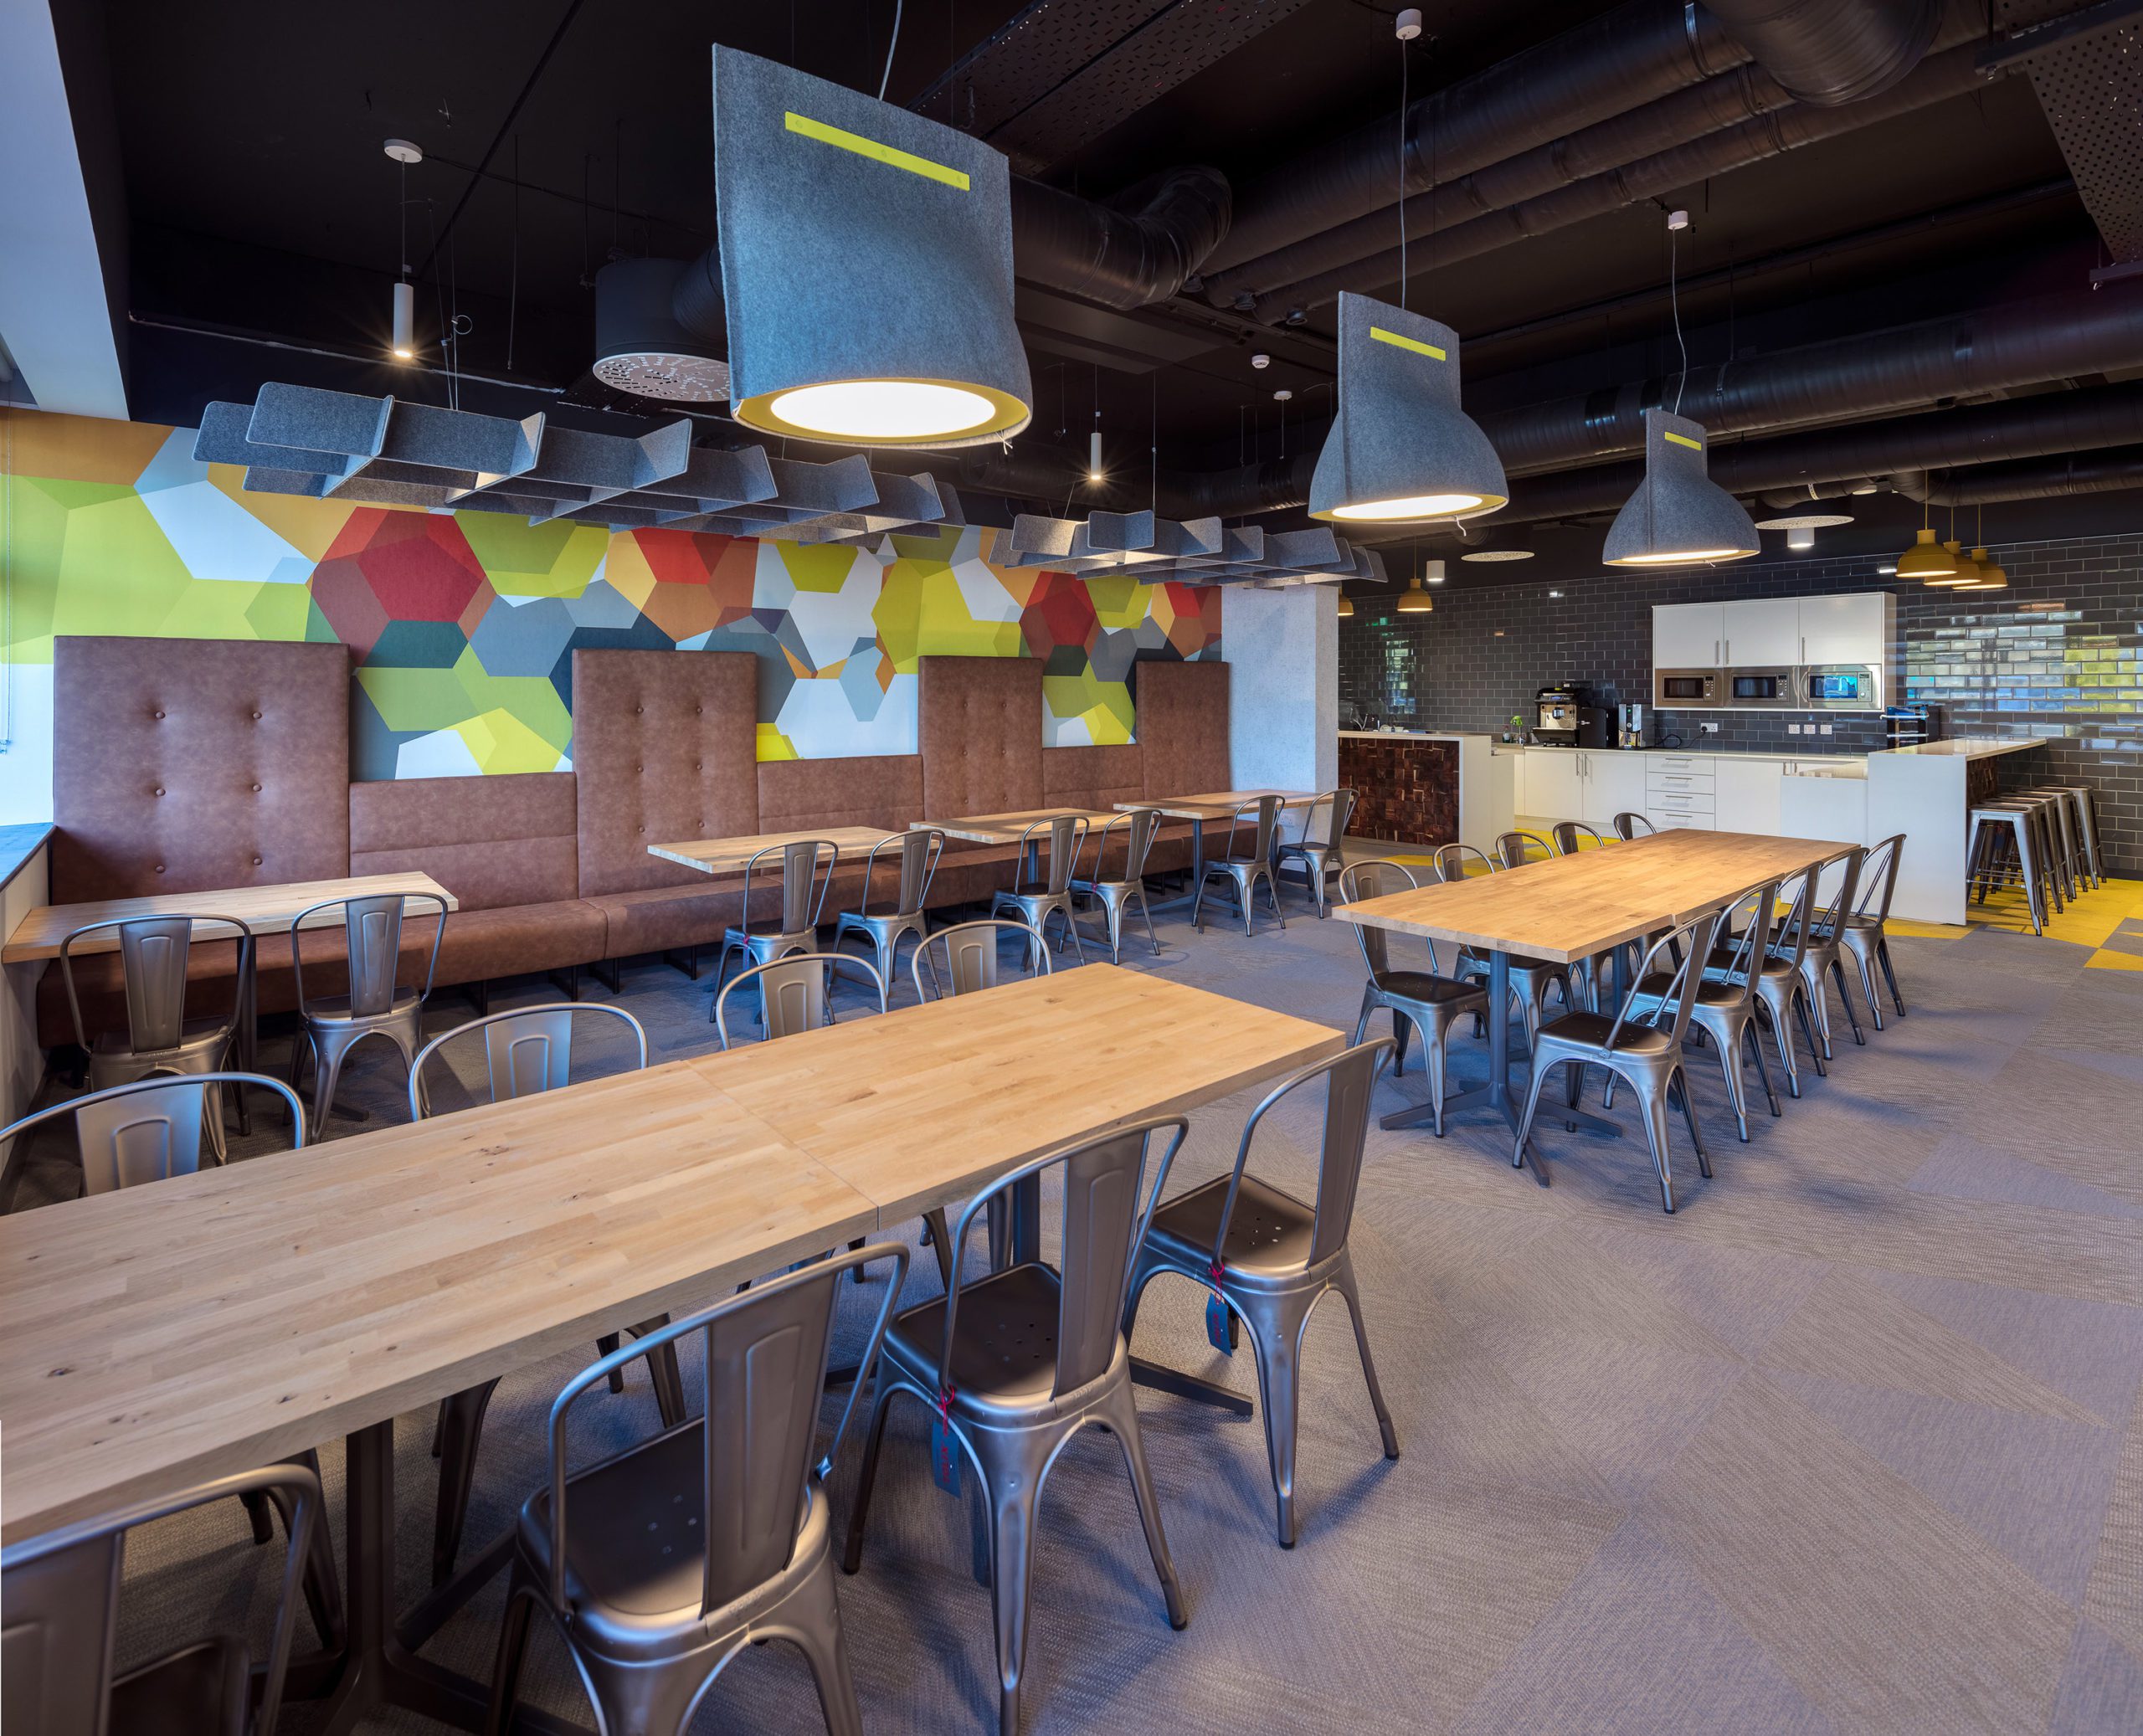 Fit-Out of Pilz Cork